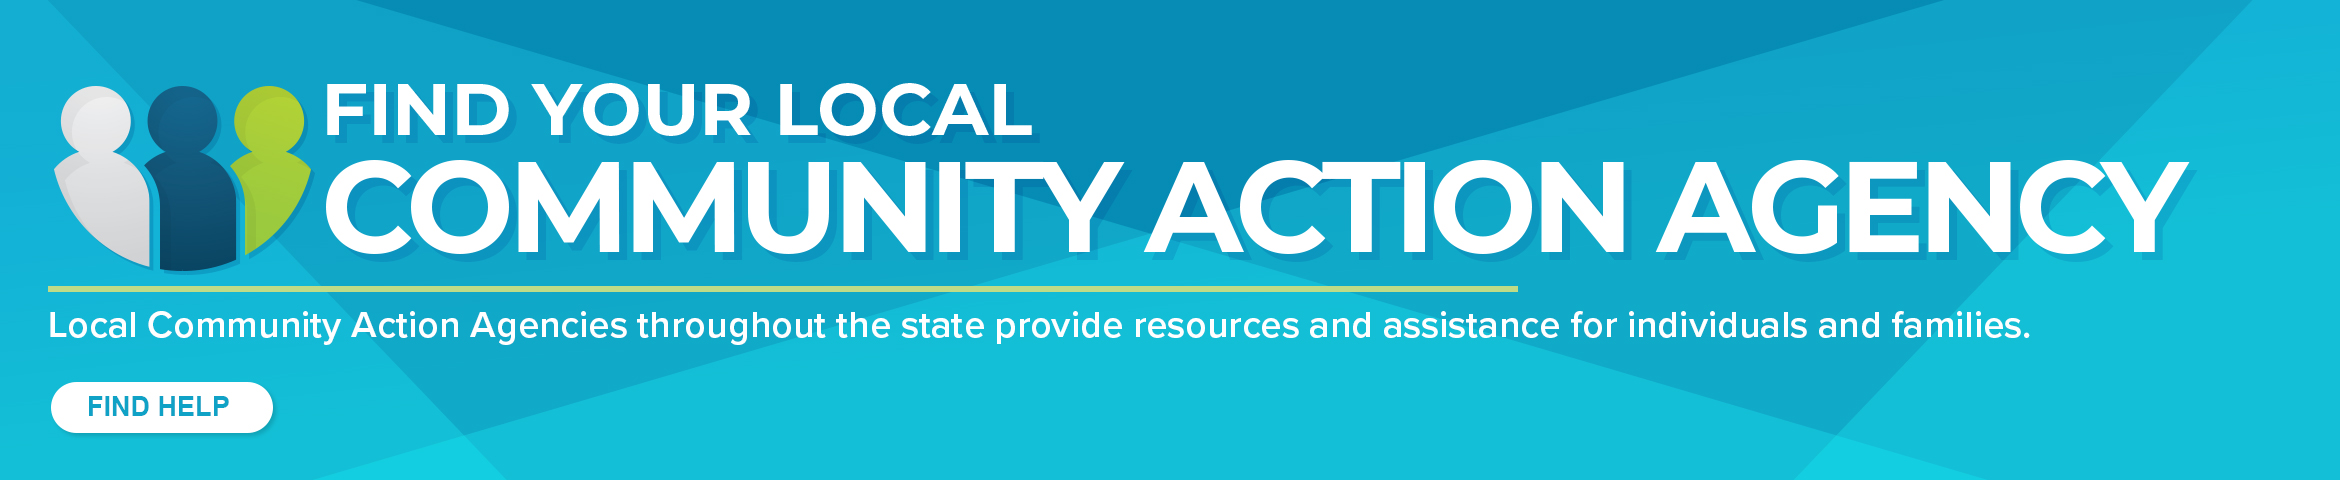 Community-Action-Agency-banner